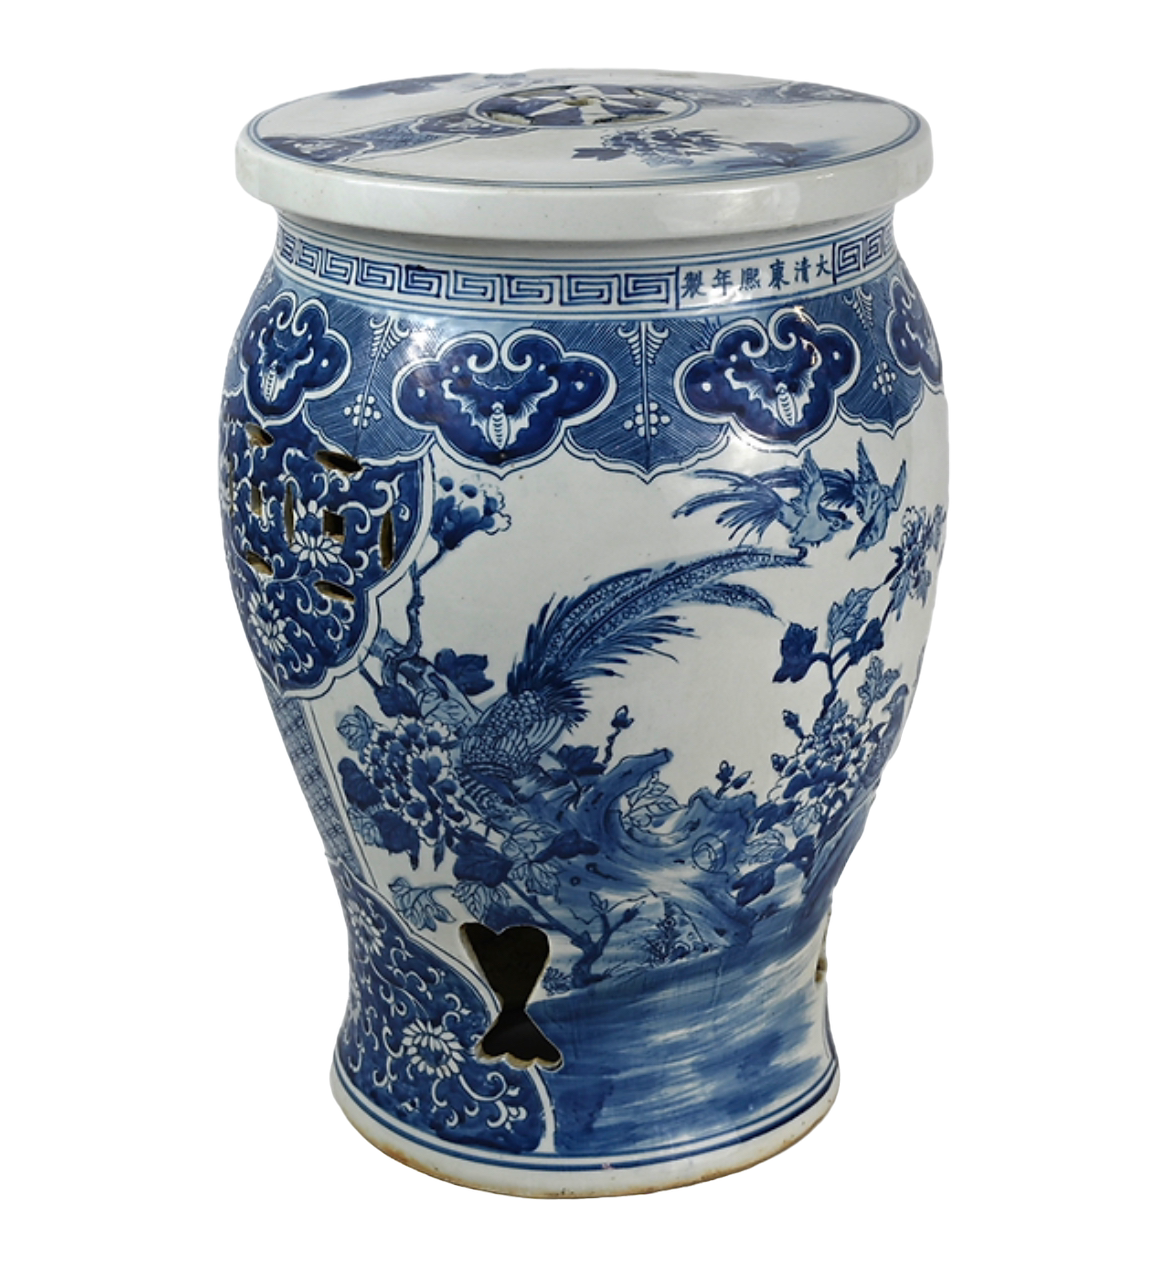 Antique-Style Blue and White Garden Stool with Bird and Flower Detail